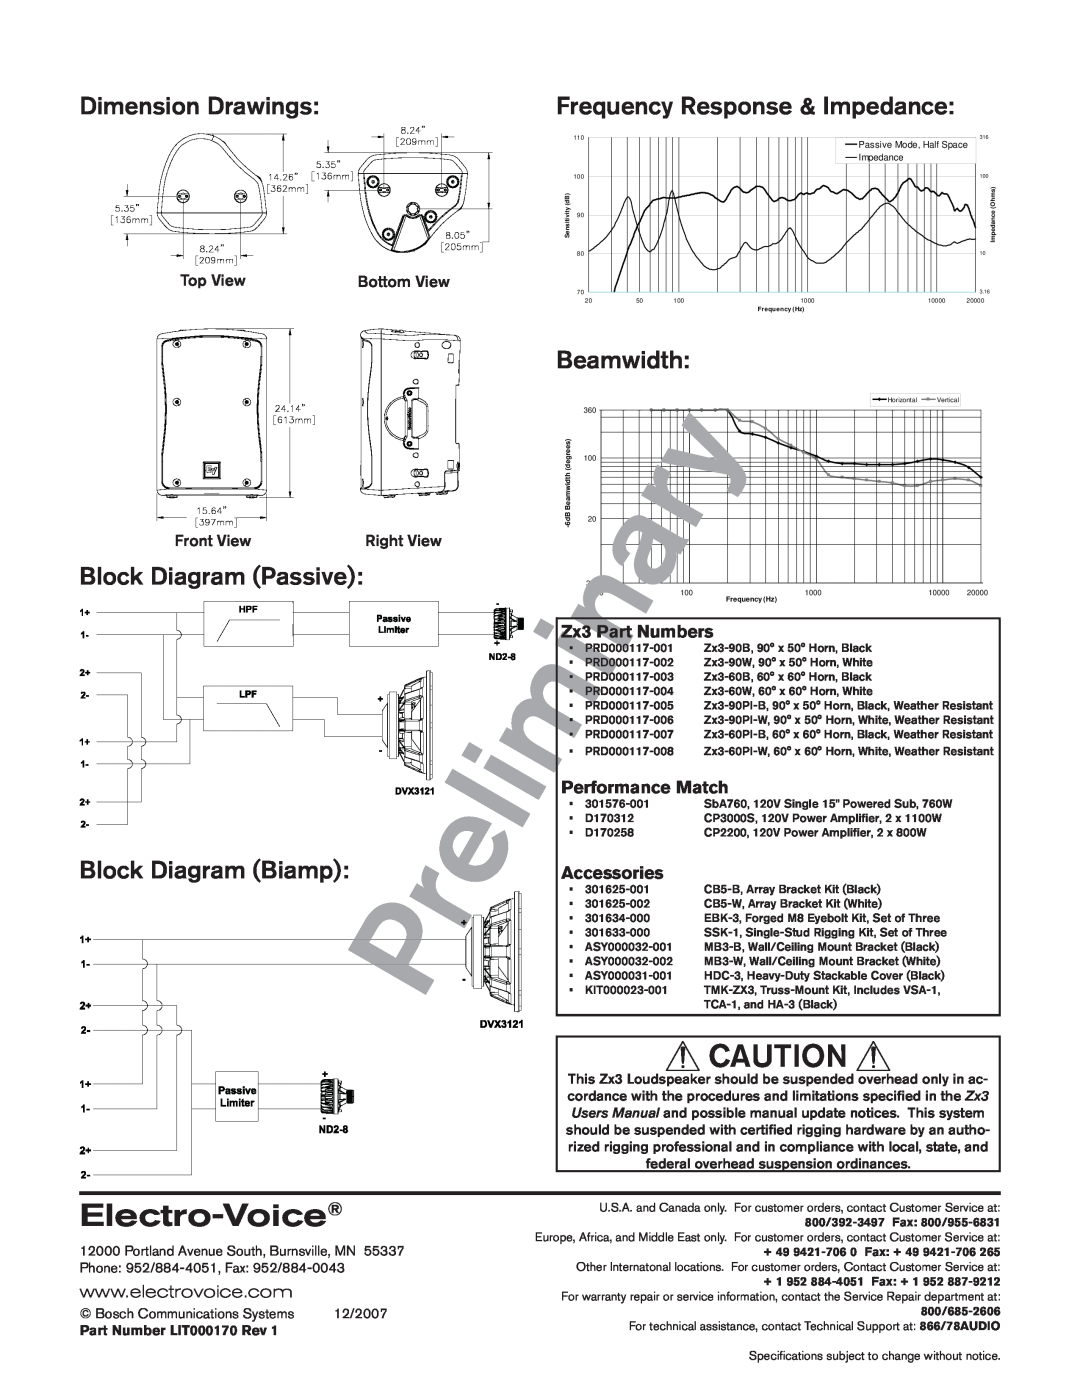 Electro-Voice ZX3-90 Dimension Drawings, Block Diagram Passive Block Diagram Biamp, Frequency Response & Impedance 